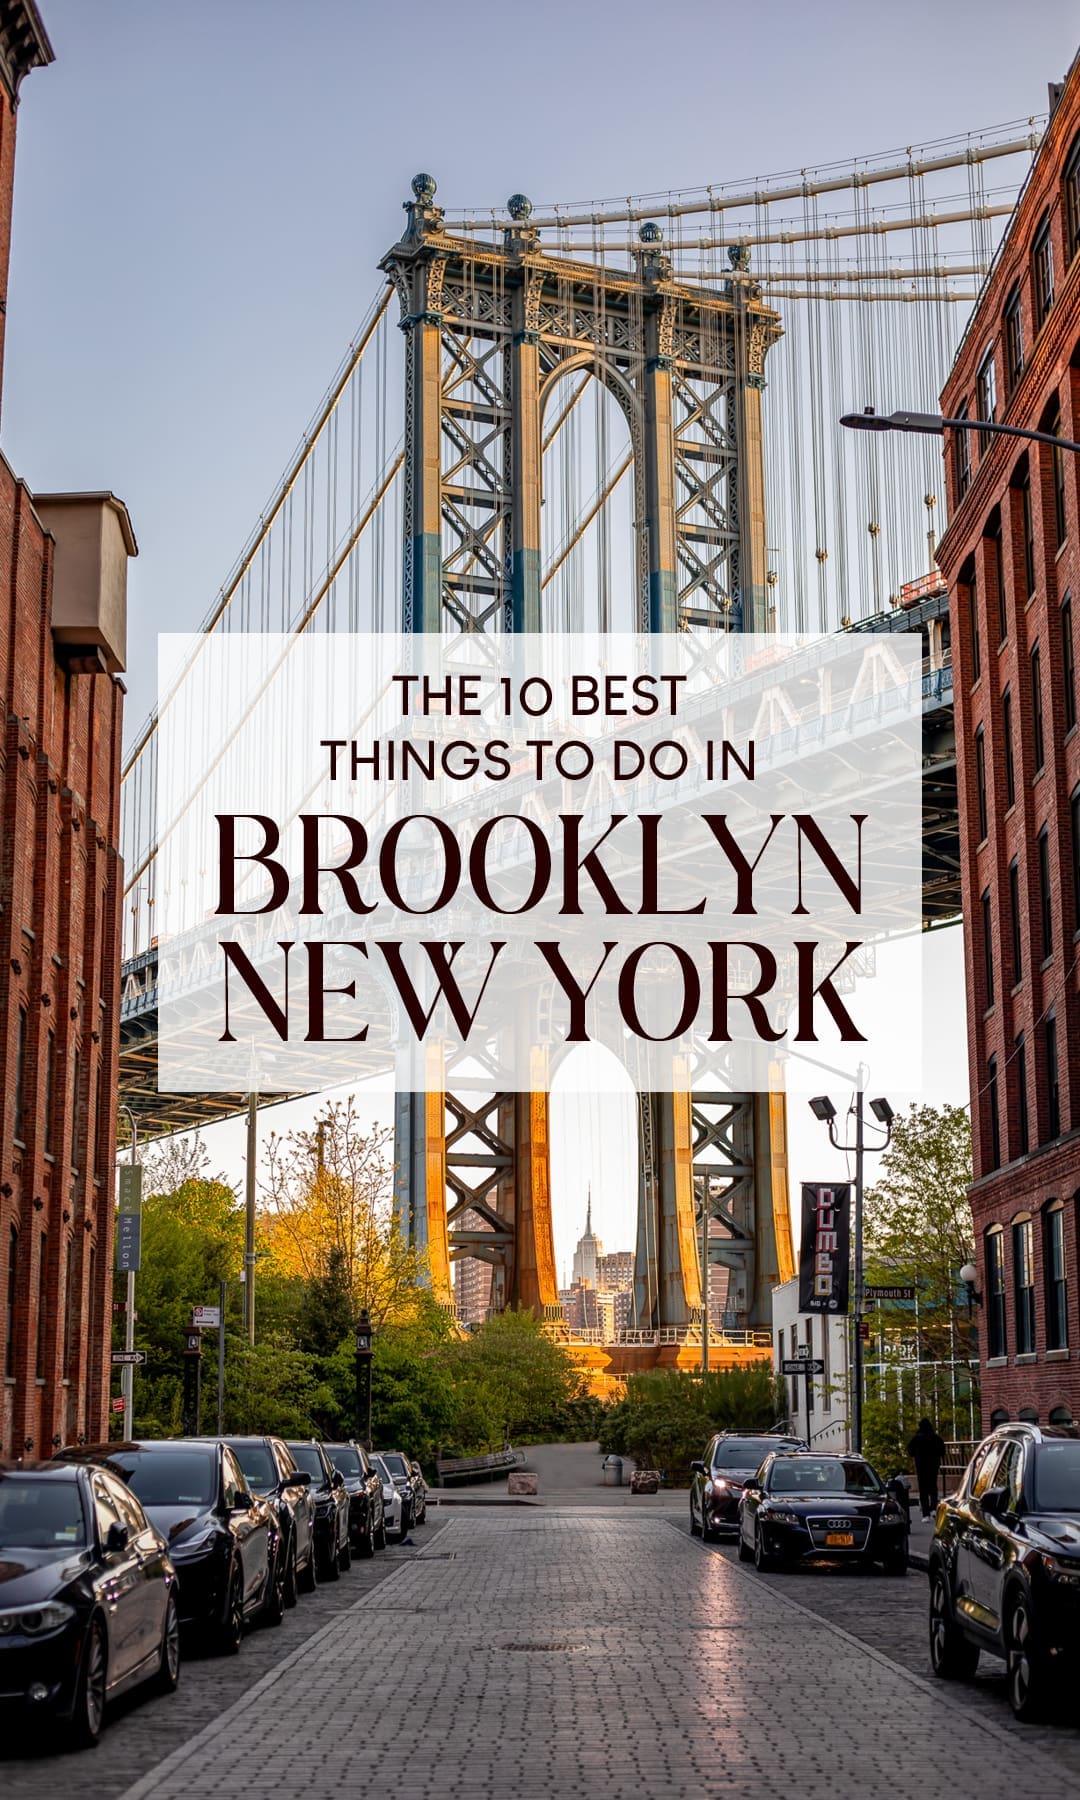 The 10 best things to do in Brooklyn, New York